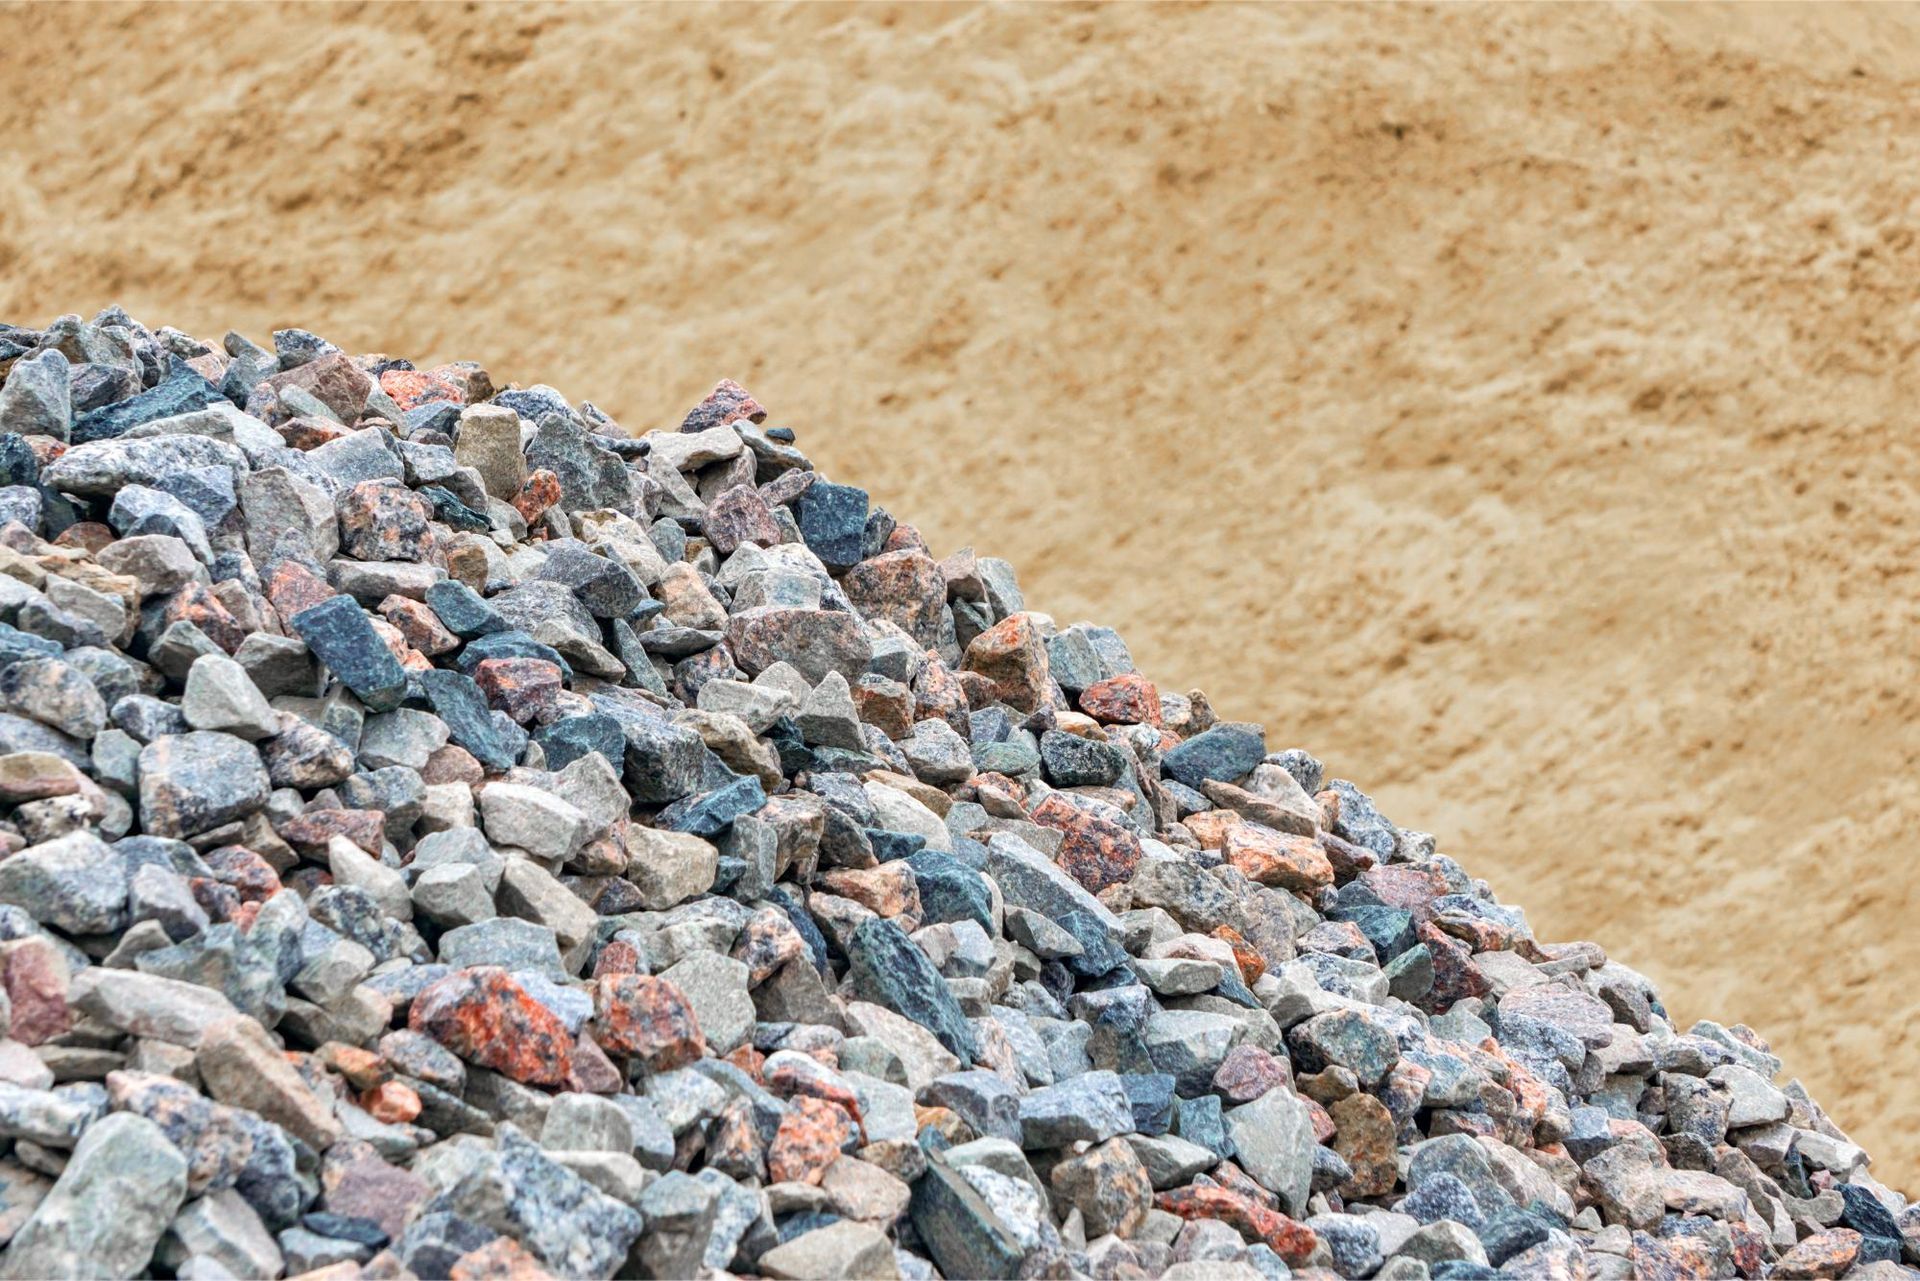 A pile of rocks sitting on top of a pile of sand.